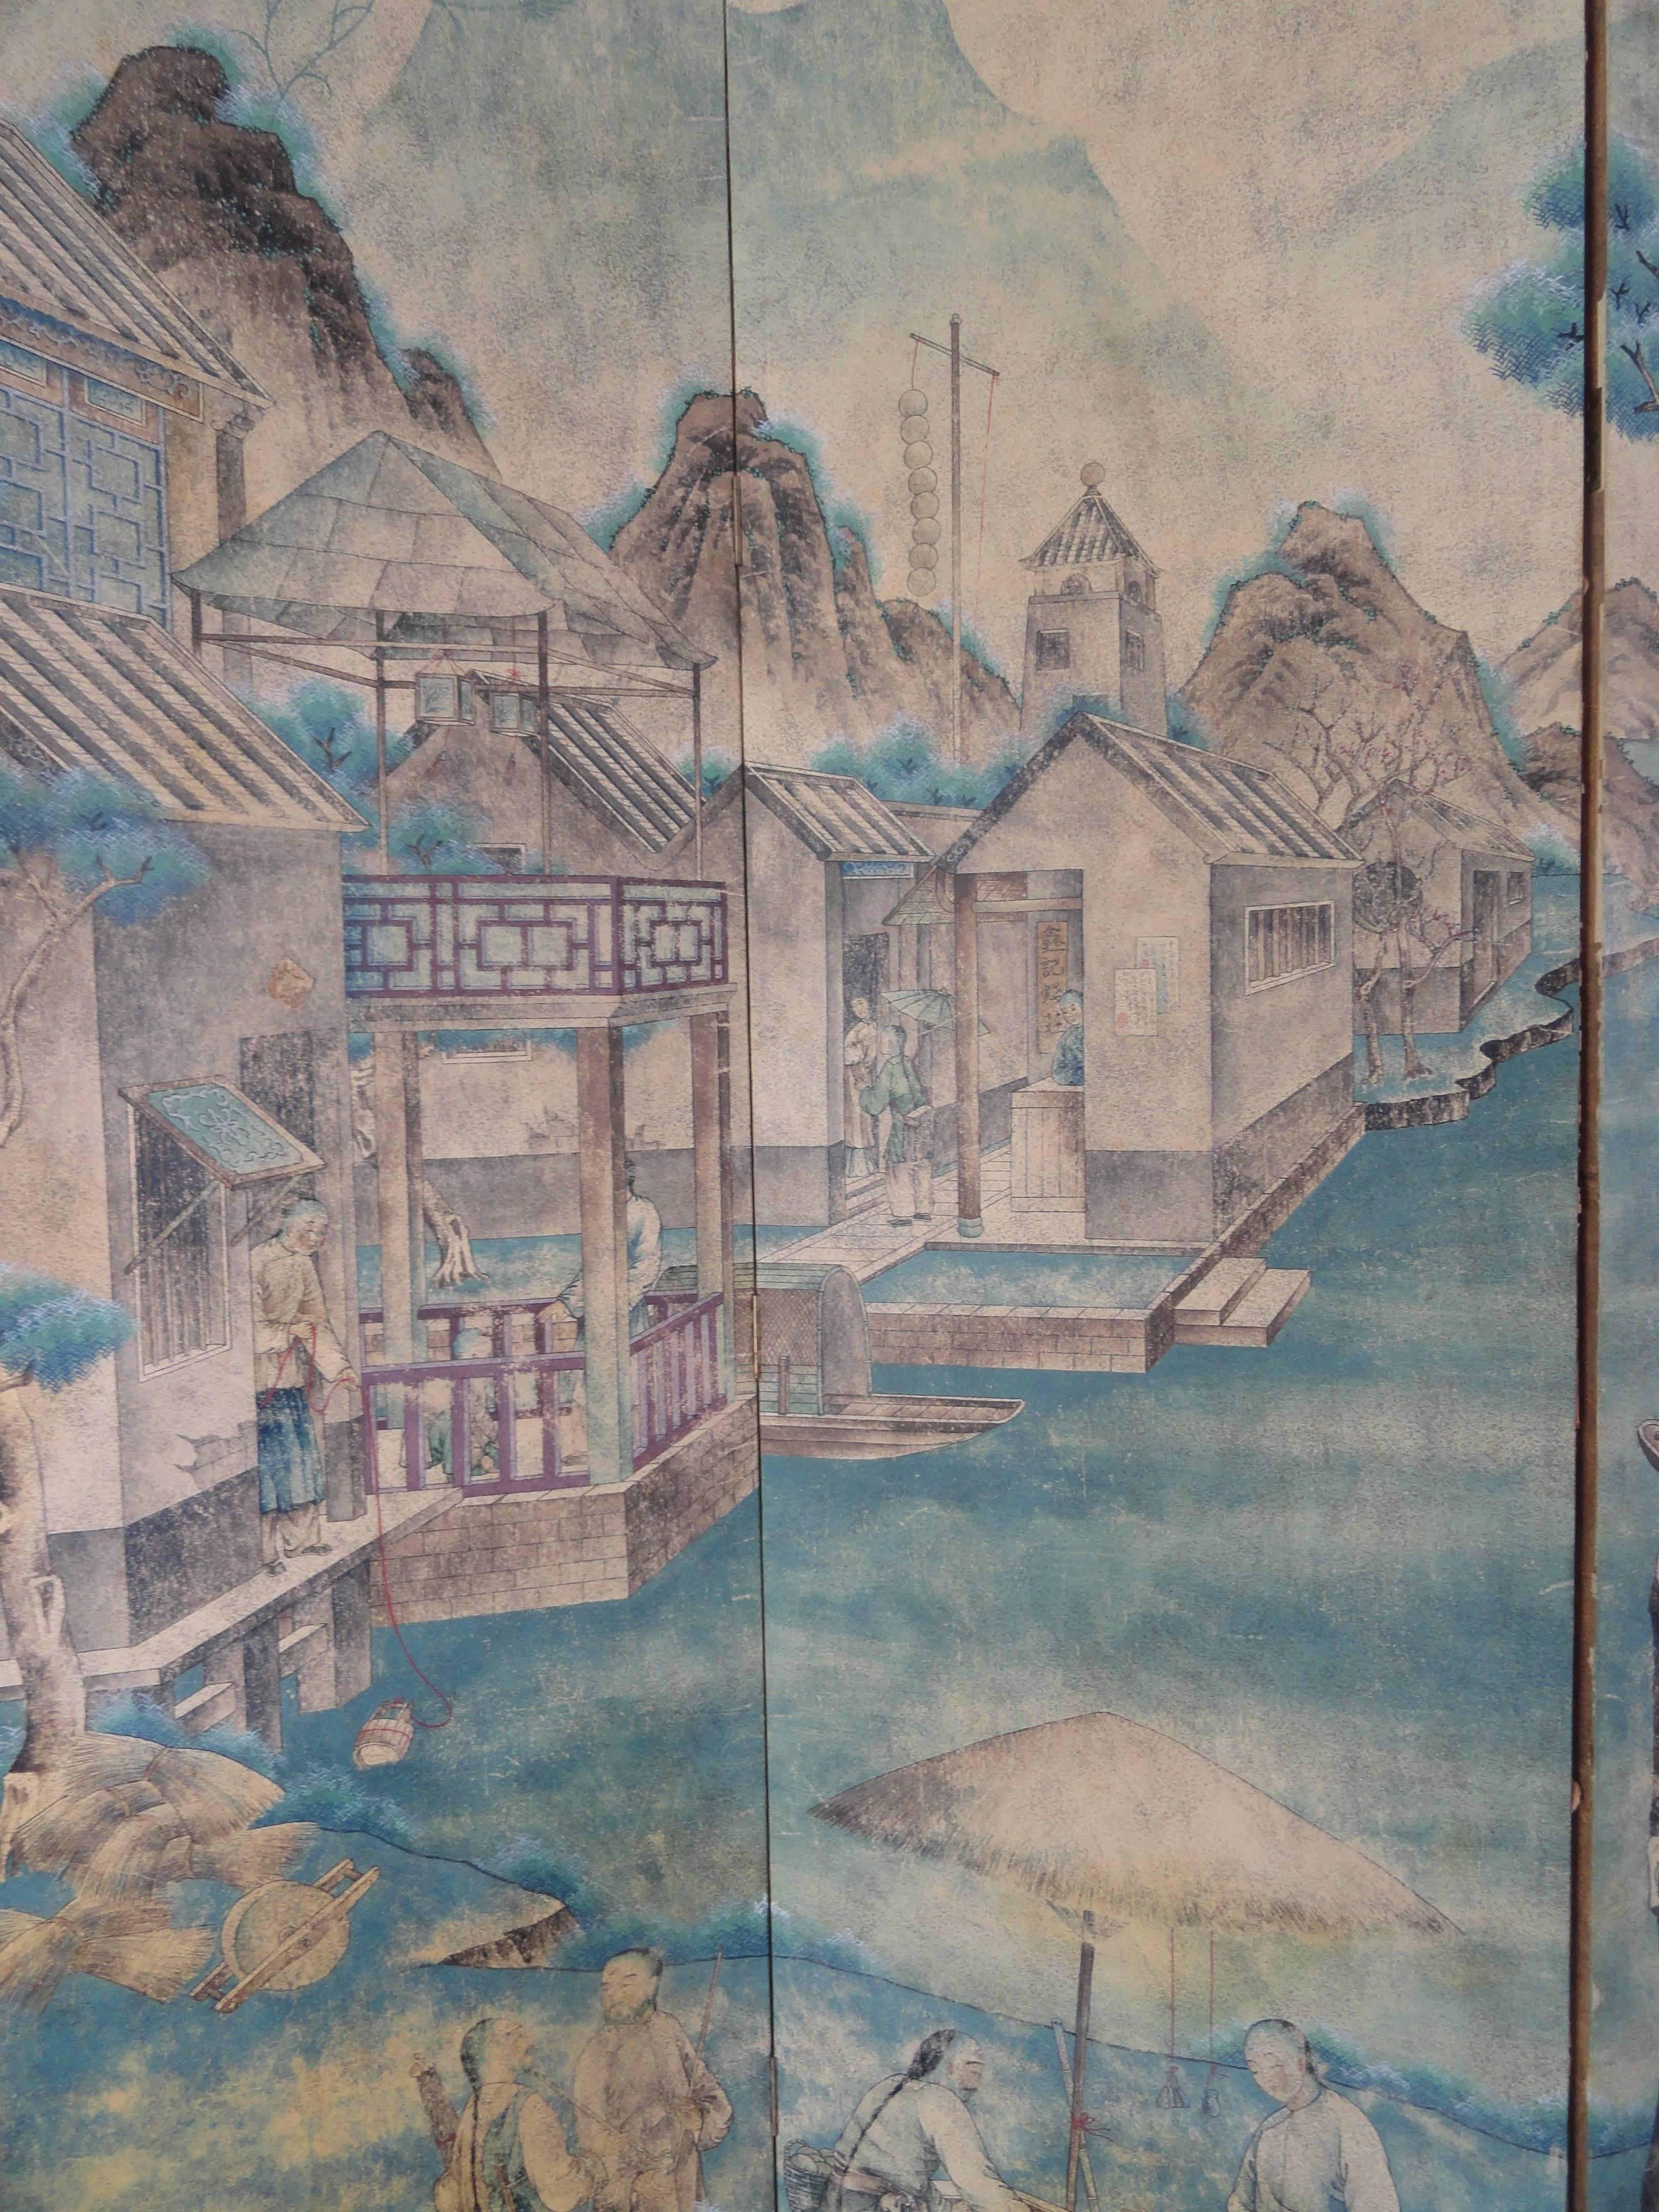 Late 18th-early 19th century Chinese six-panel screen with painted scenes of a mystical village with homes and temples and markets. Framed in wood. Fronting on lovely waterways and canals.